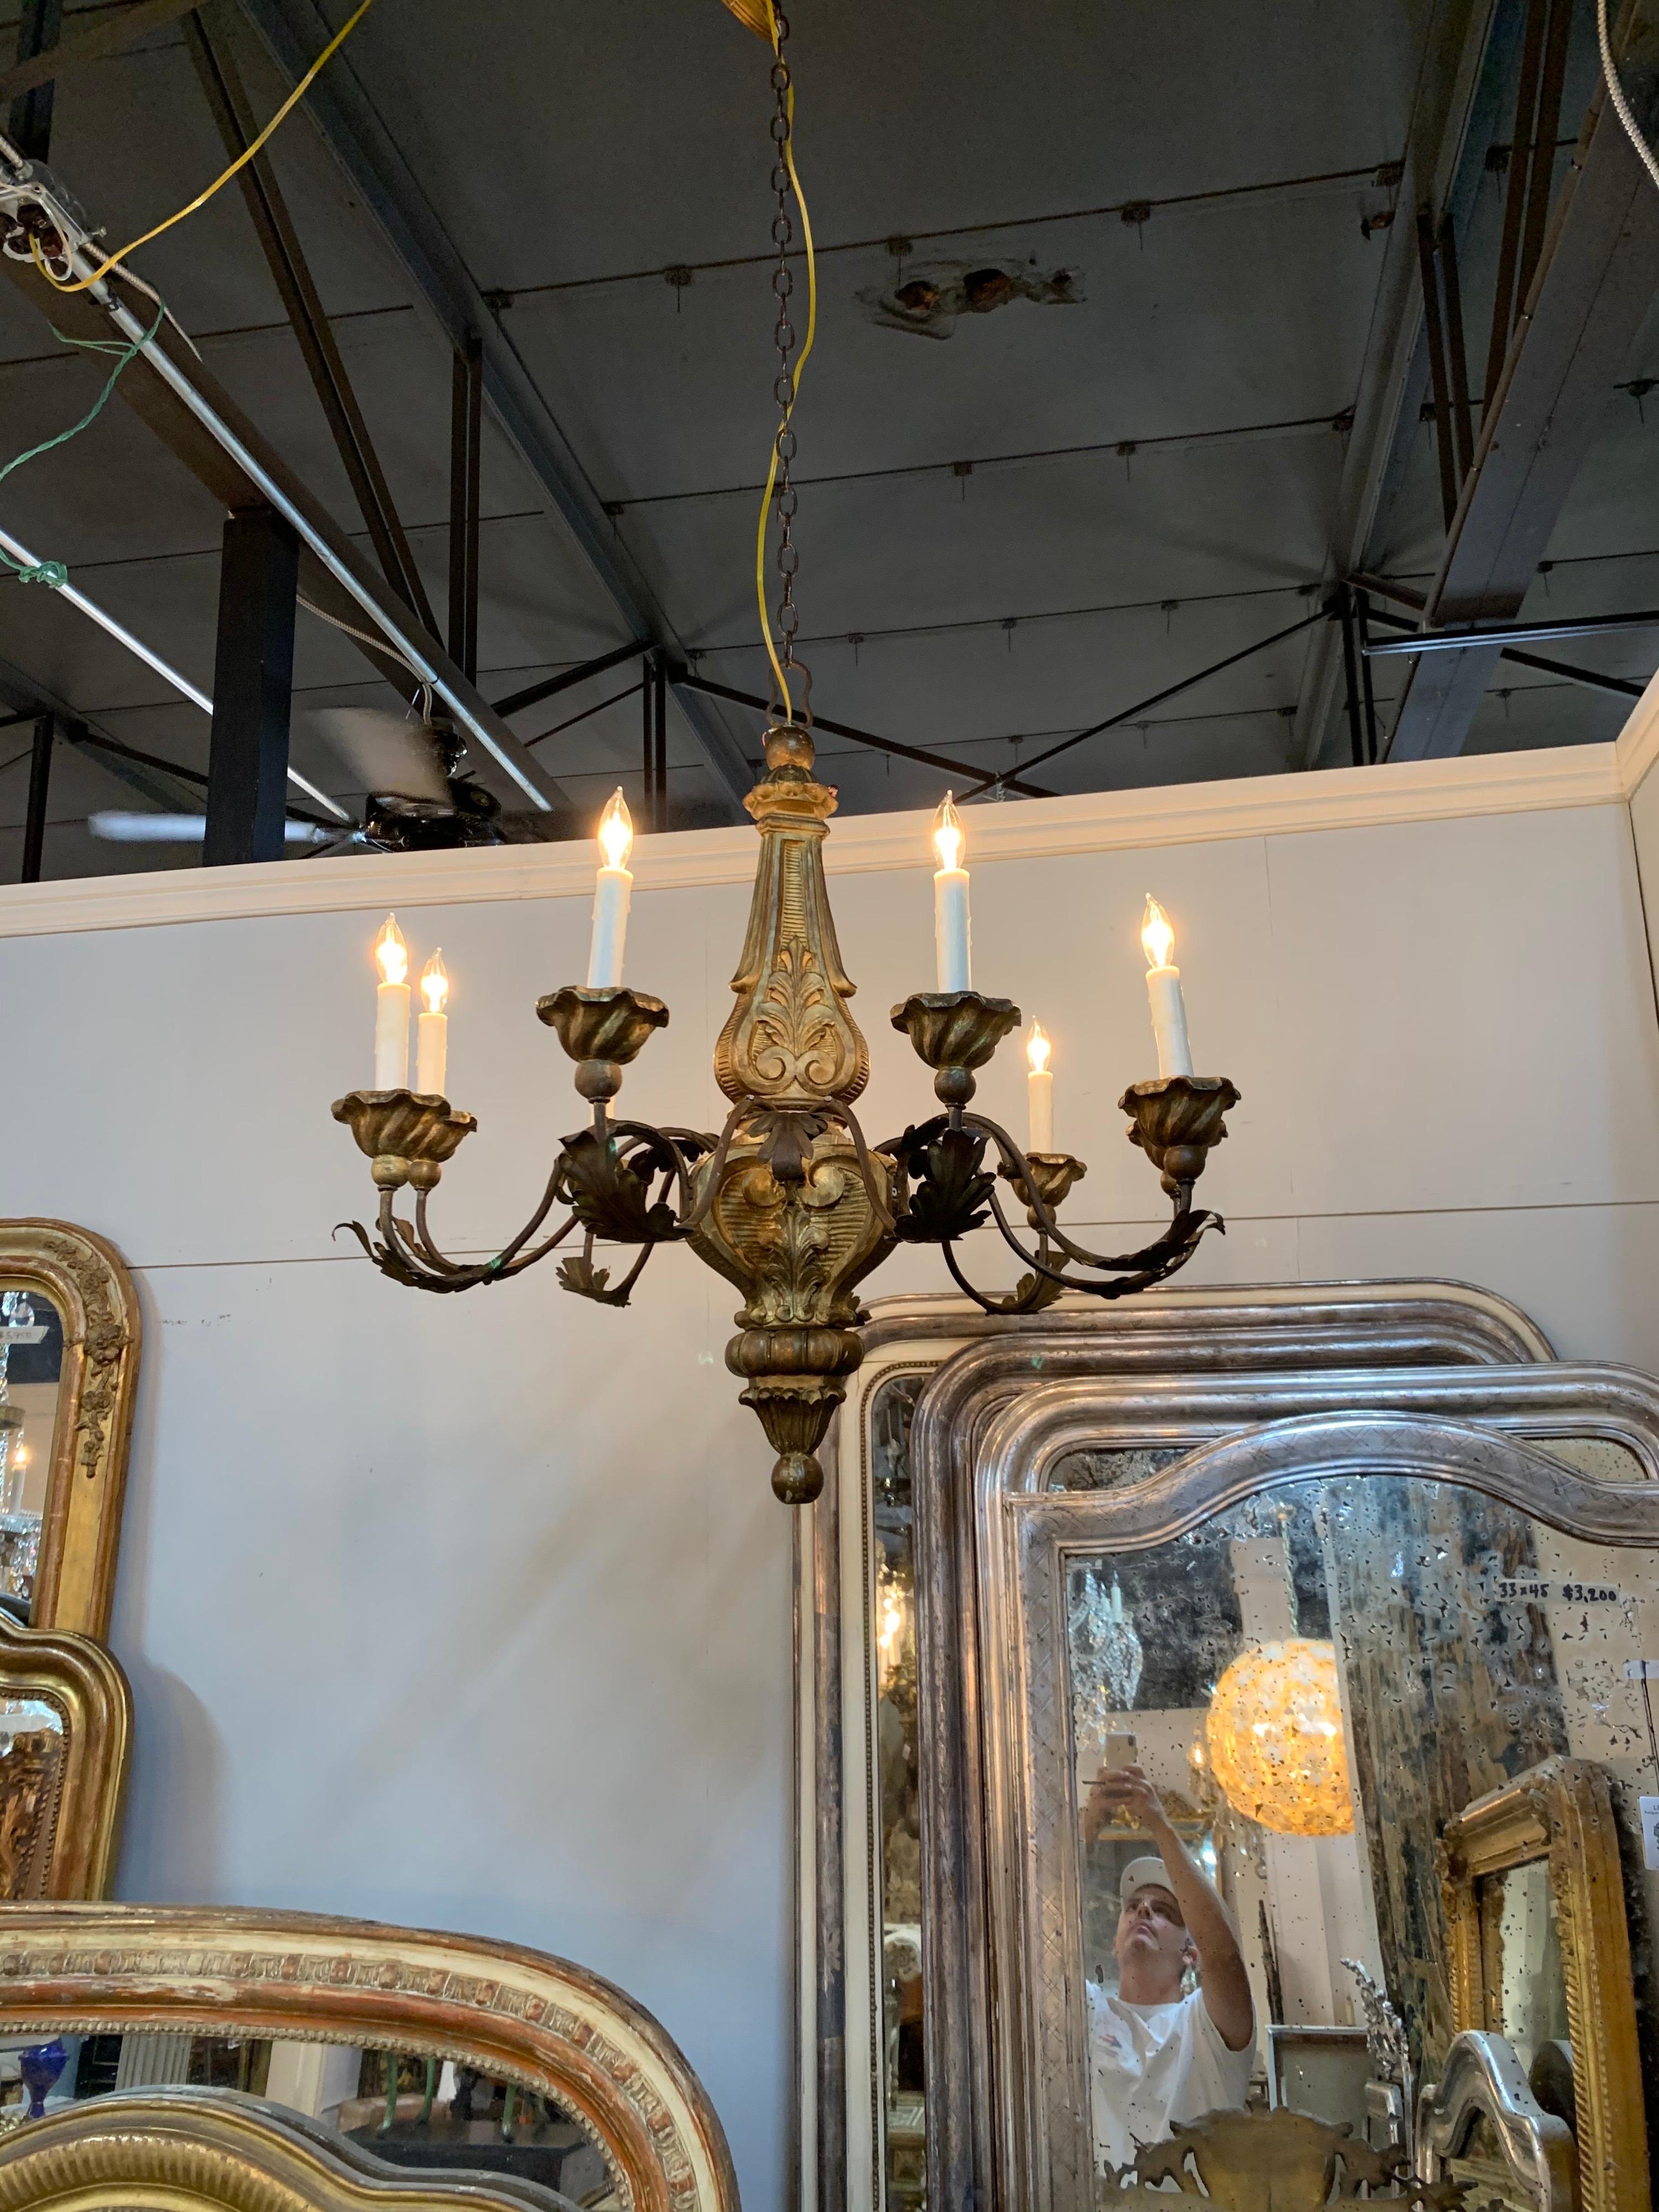 Handsome early 19th century Italian carved giltwood chandelier with 8 lights. Very pretty carvings and nice leaf pattern on the arms. Lovely!